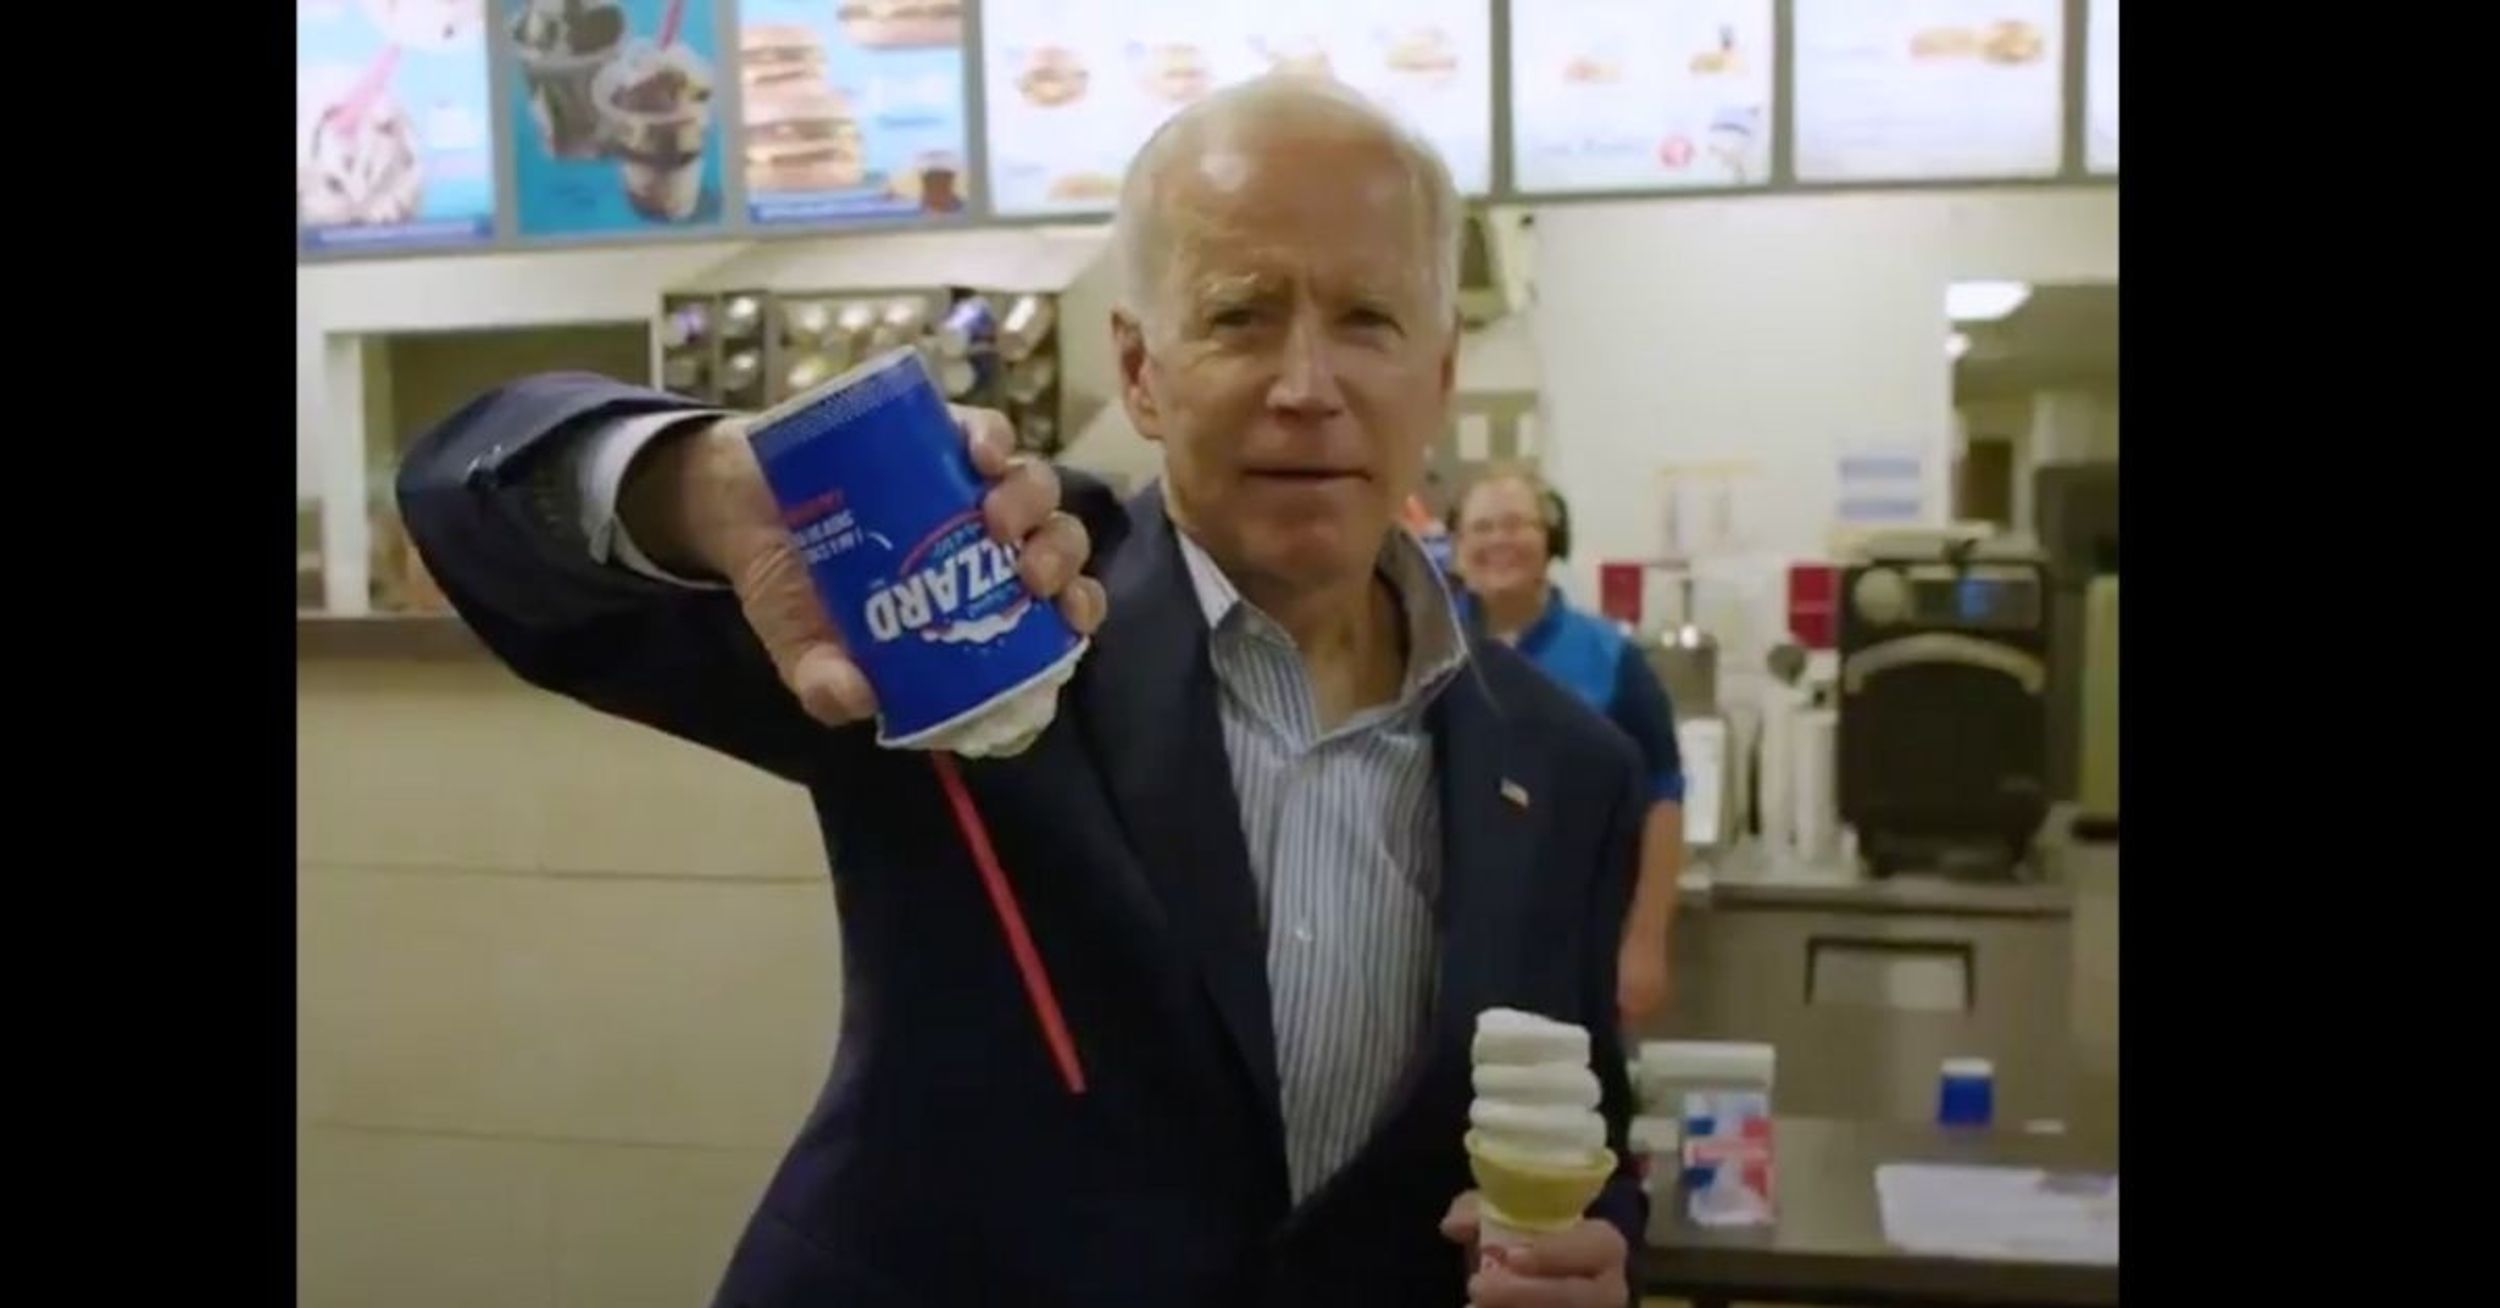 Conservatives Go Nuts With Theories After Biden Flips Dairy Queen Blizzard Upside Down In Viral Video